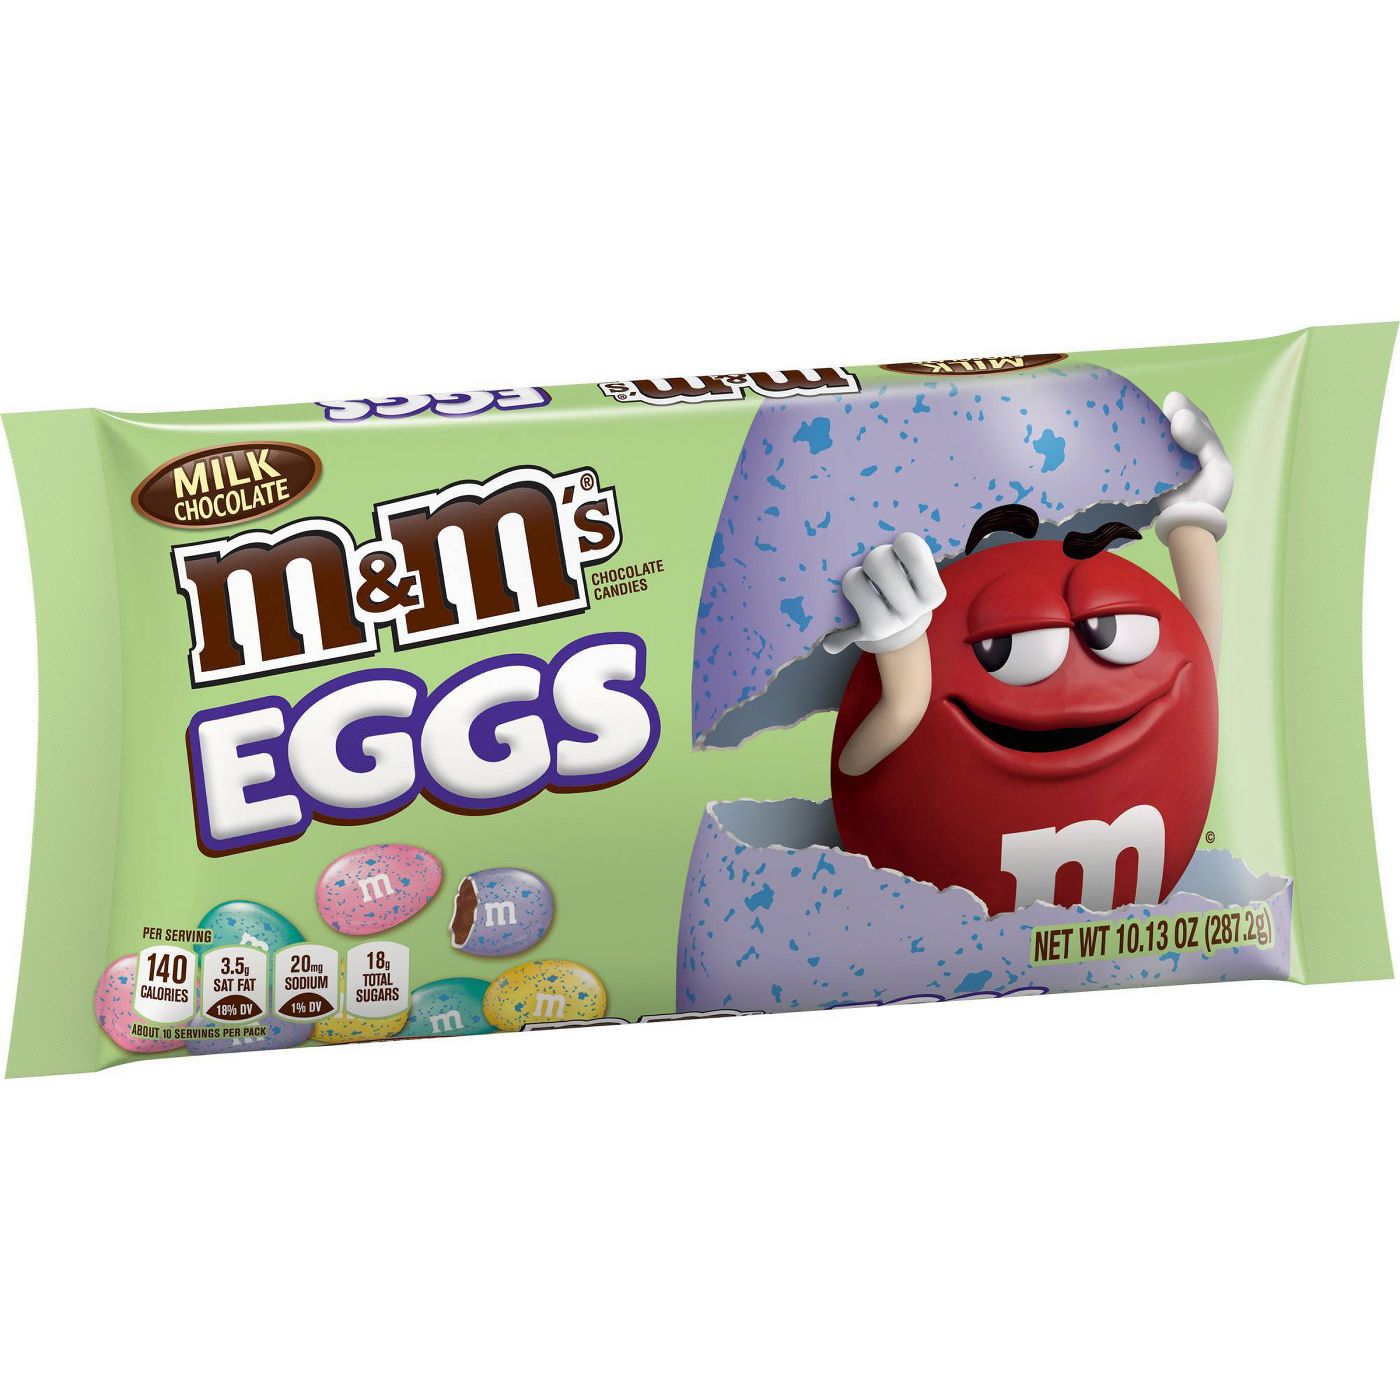 M&M's Milk Chocolate Speckled Easter Eggs, 10.13oz